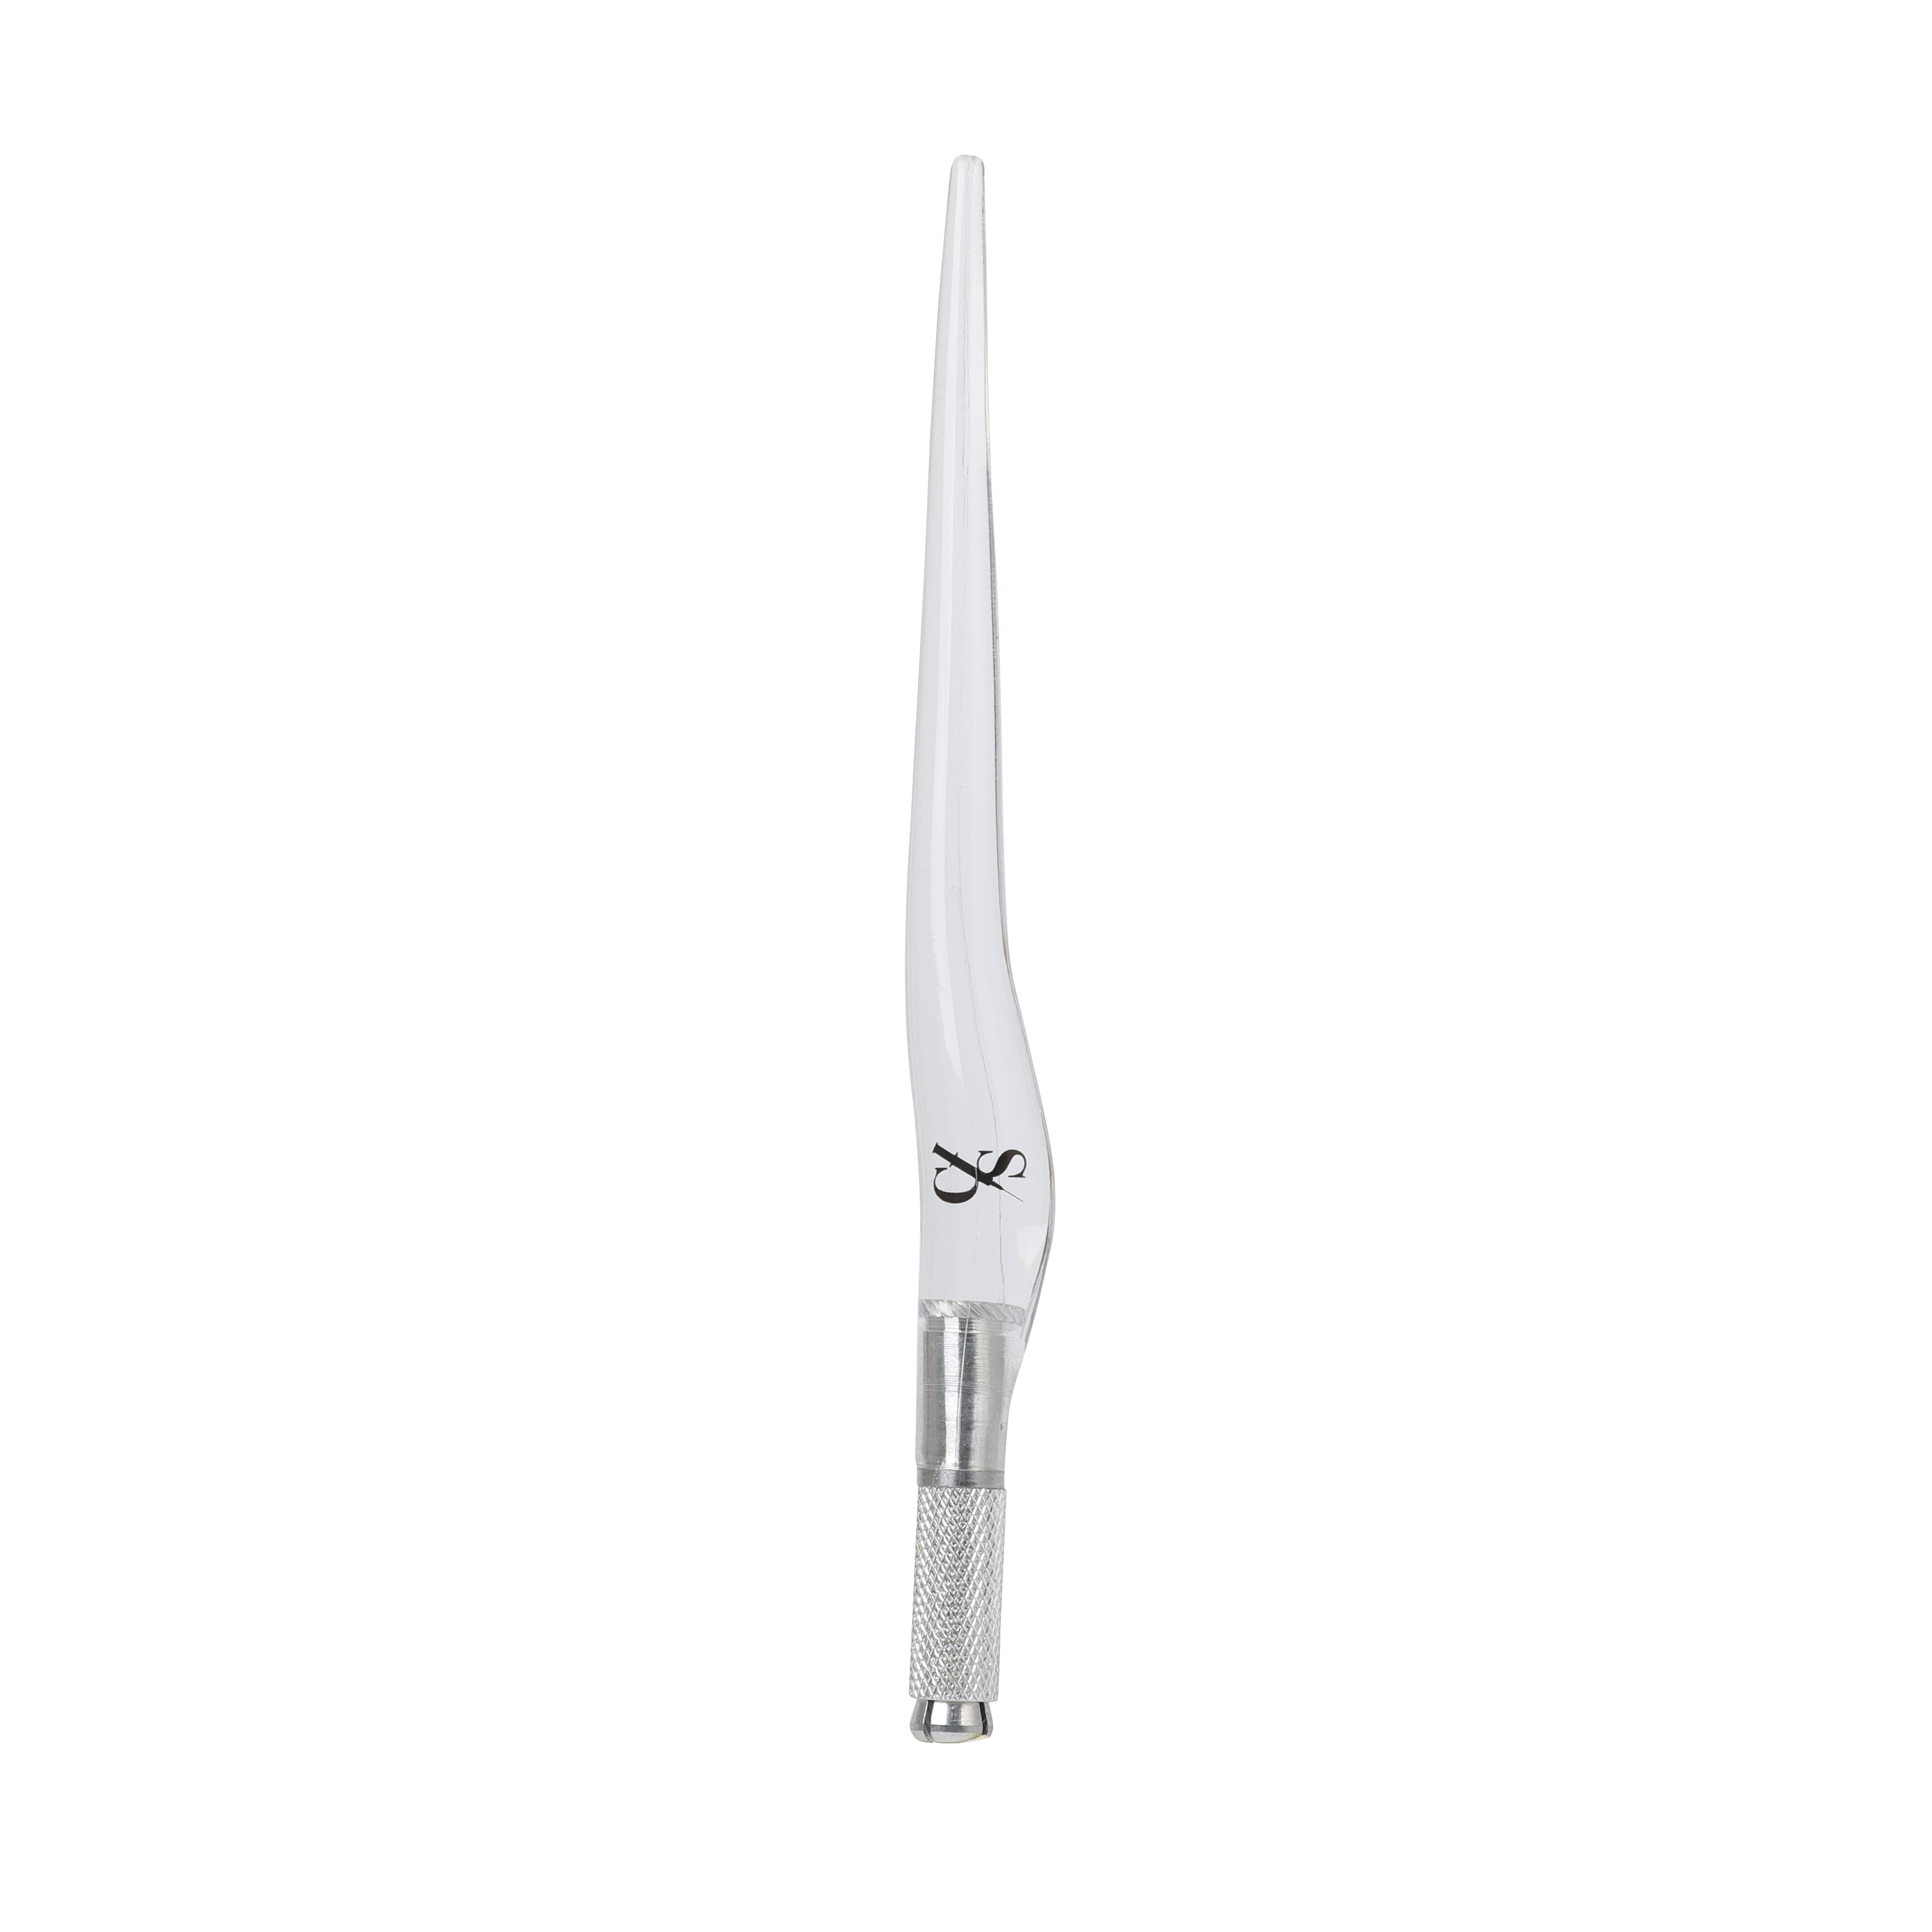 Crystal Clear Sterilized Single Use Handtool - Cosmedic Supplies